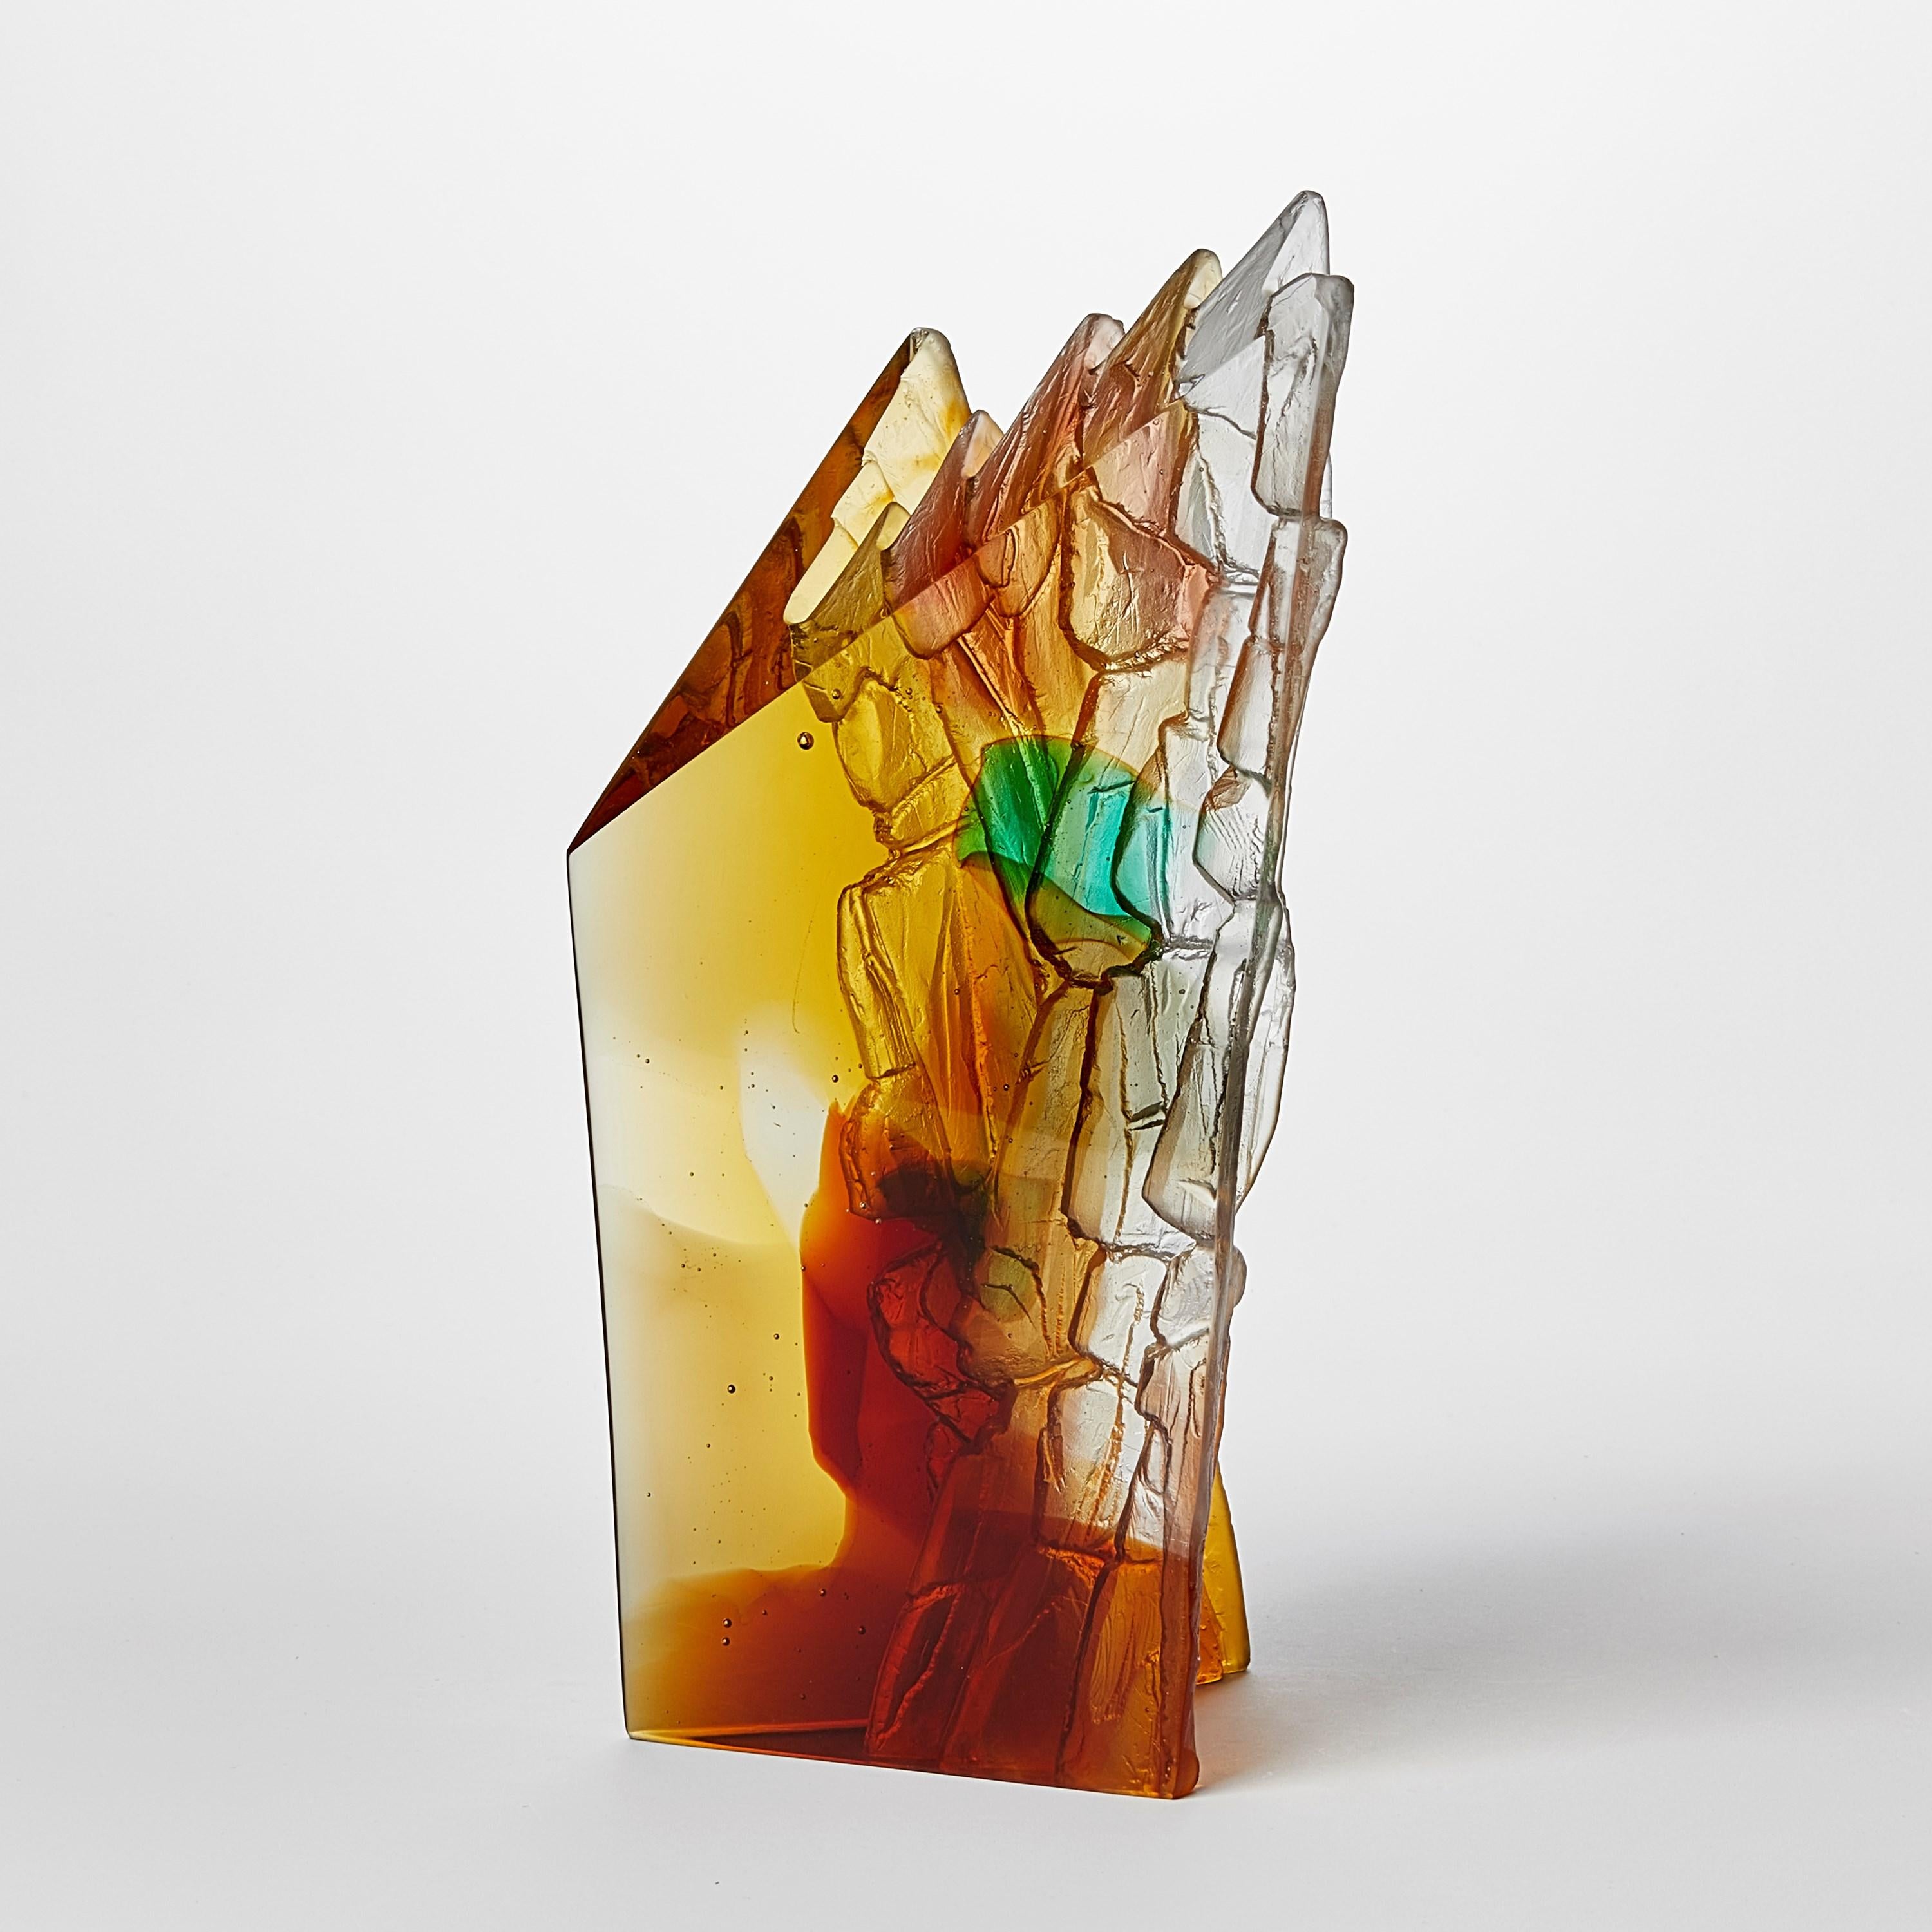 'Amber Cliff' is a unique cast glass sculpture by the British artist, Crispian Heath.

Crispian Heath's work is predominantly inspired by landscape and his love for exploring the rugged cliffs and other geological sites which are unique to Britain.